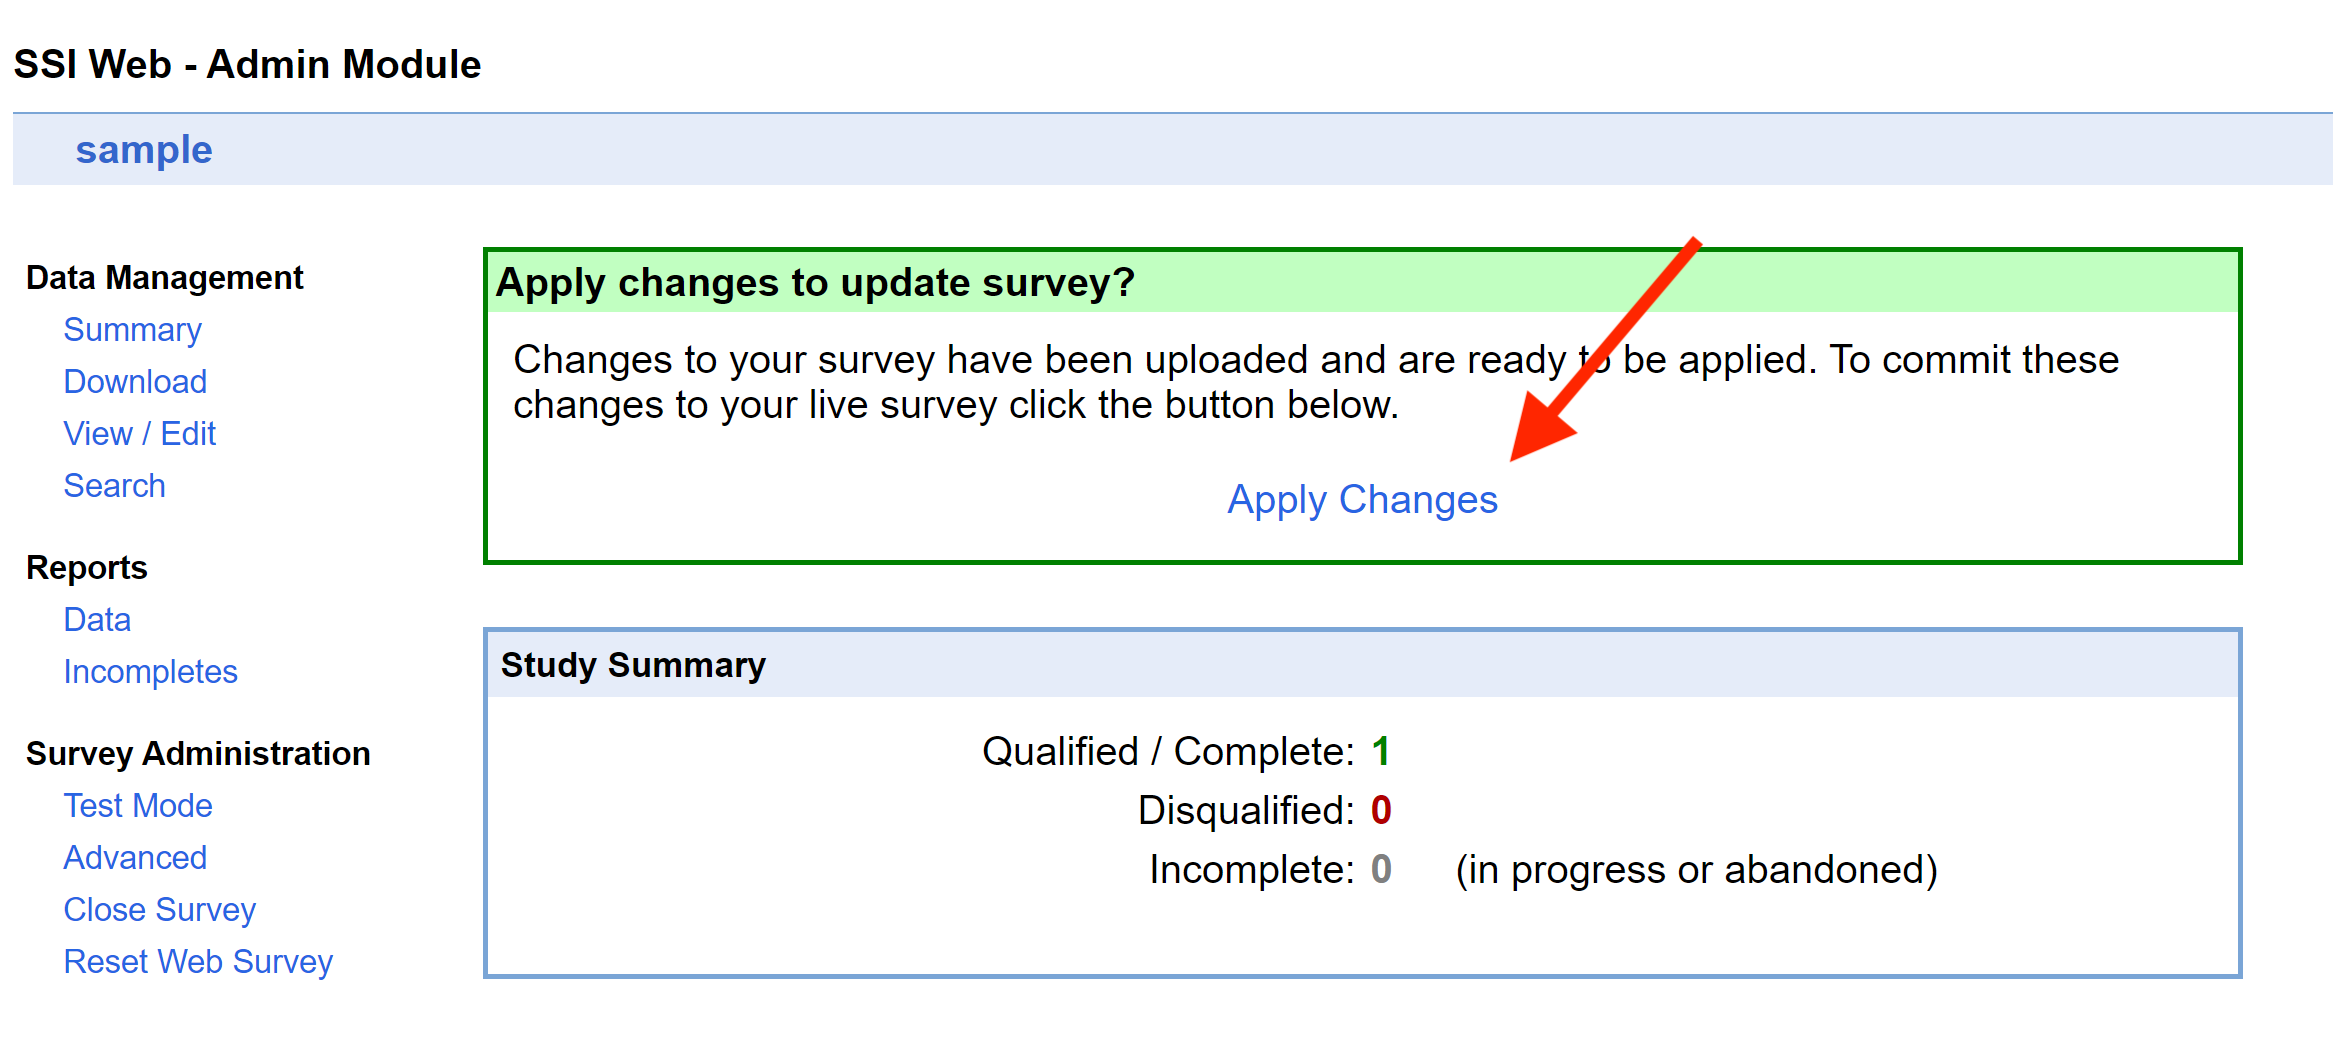 Screen shot pointing out the "Apply Changes" link in the Admin Module interface.